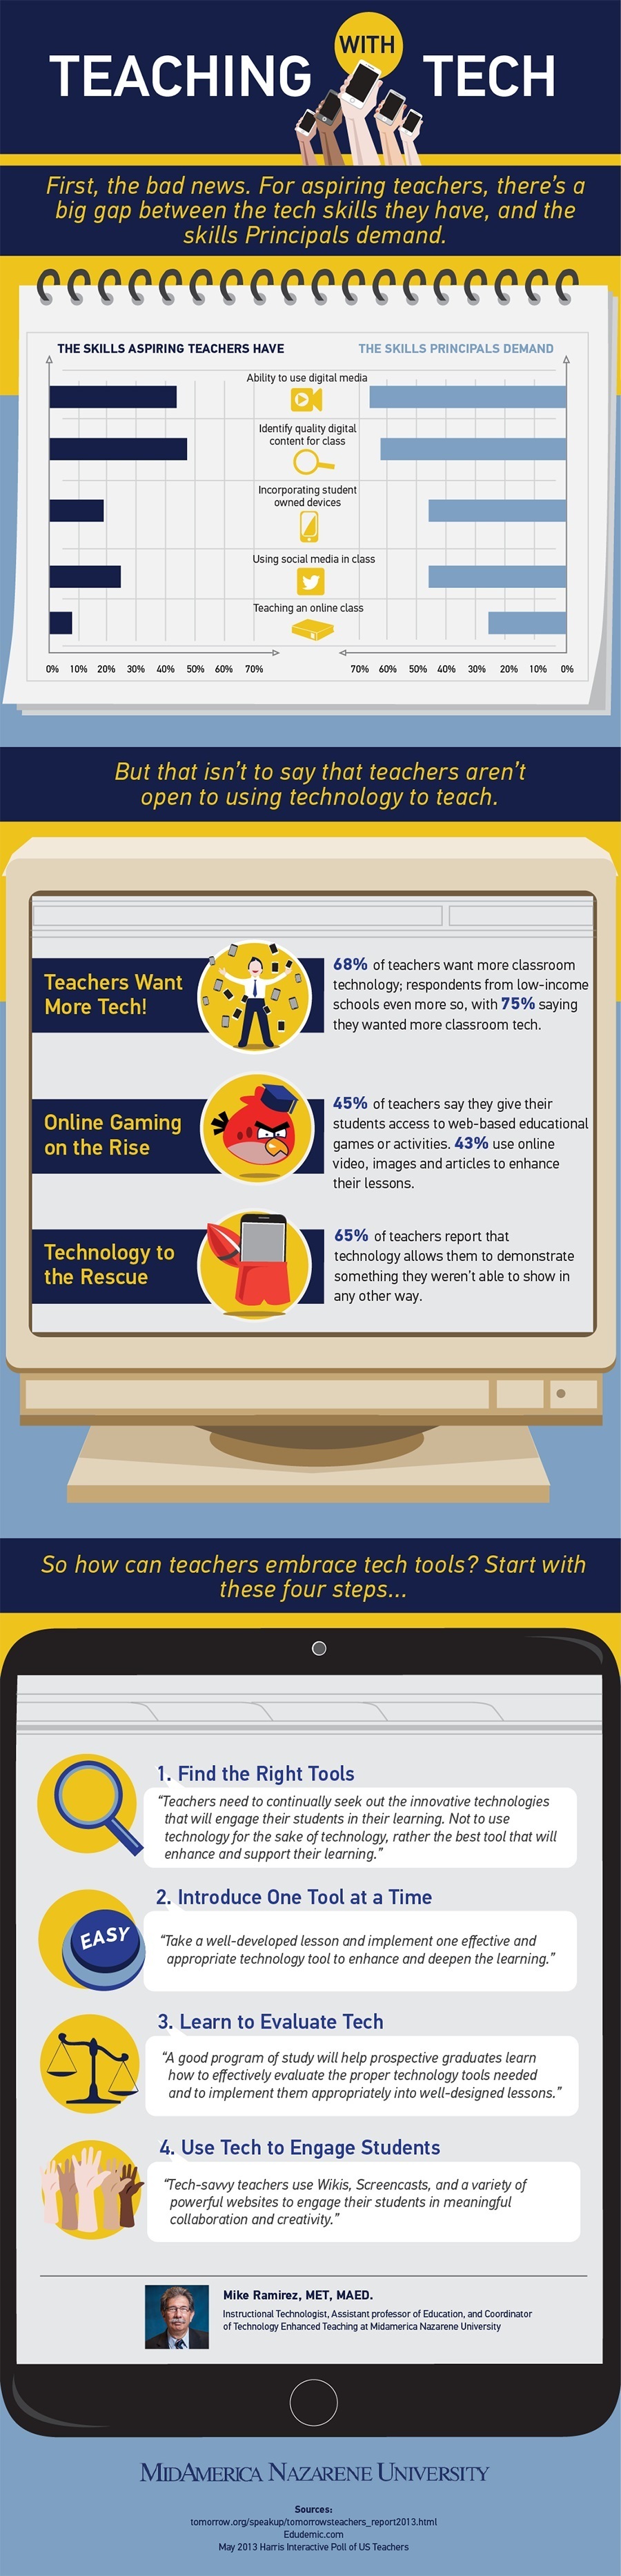 Teaching with Technology Infographic